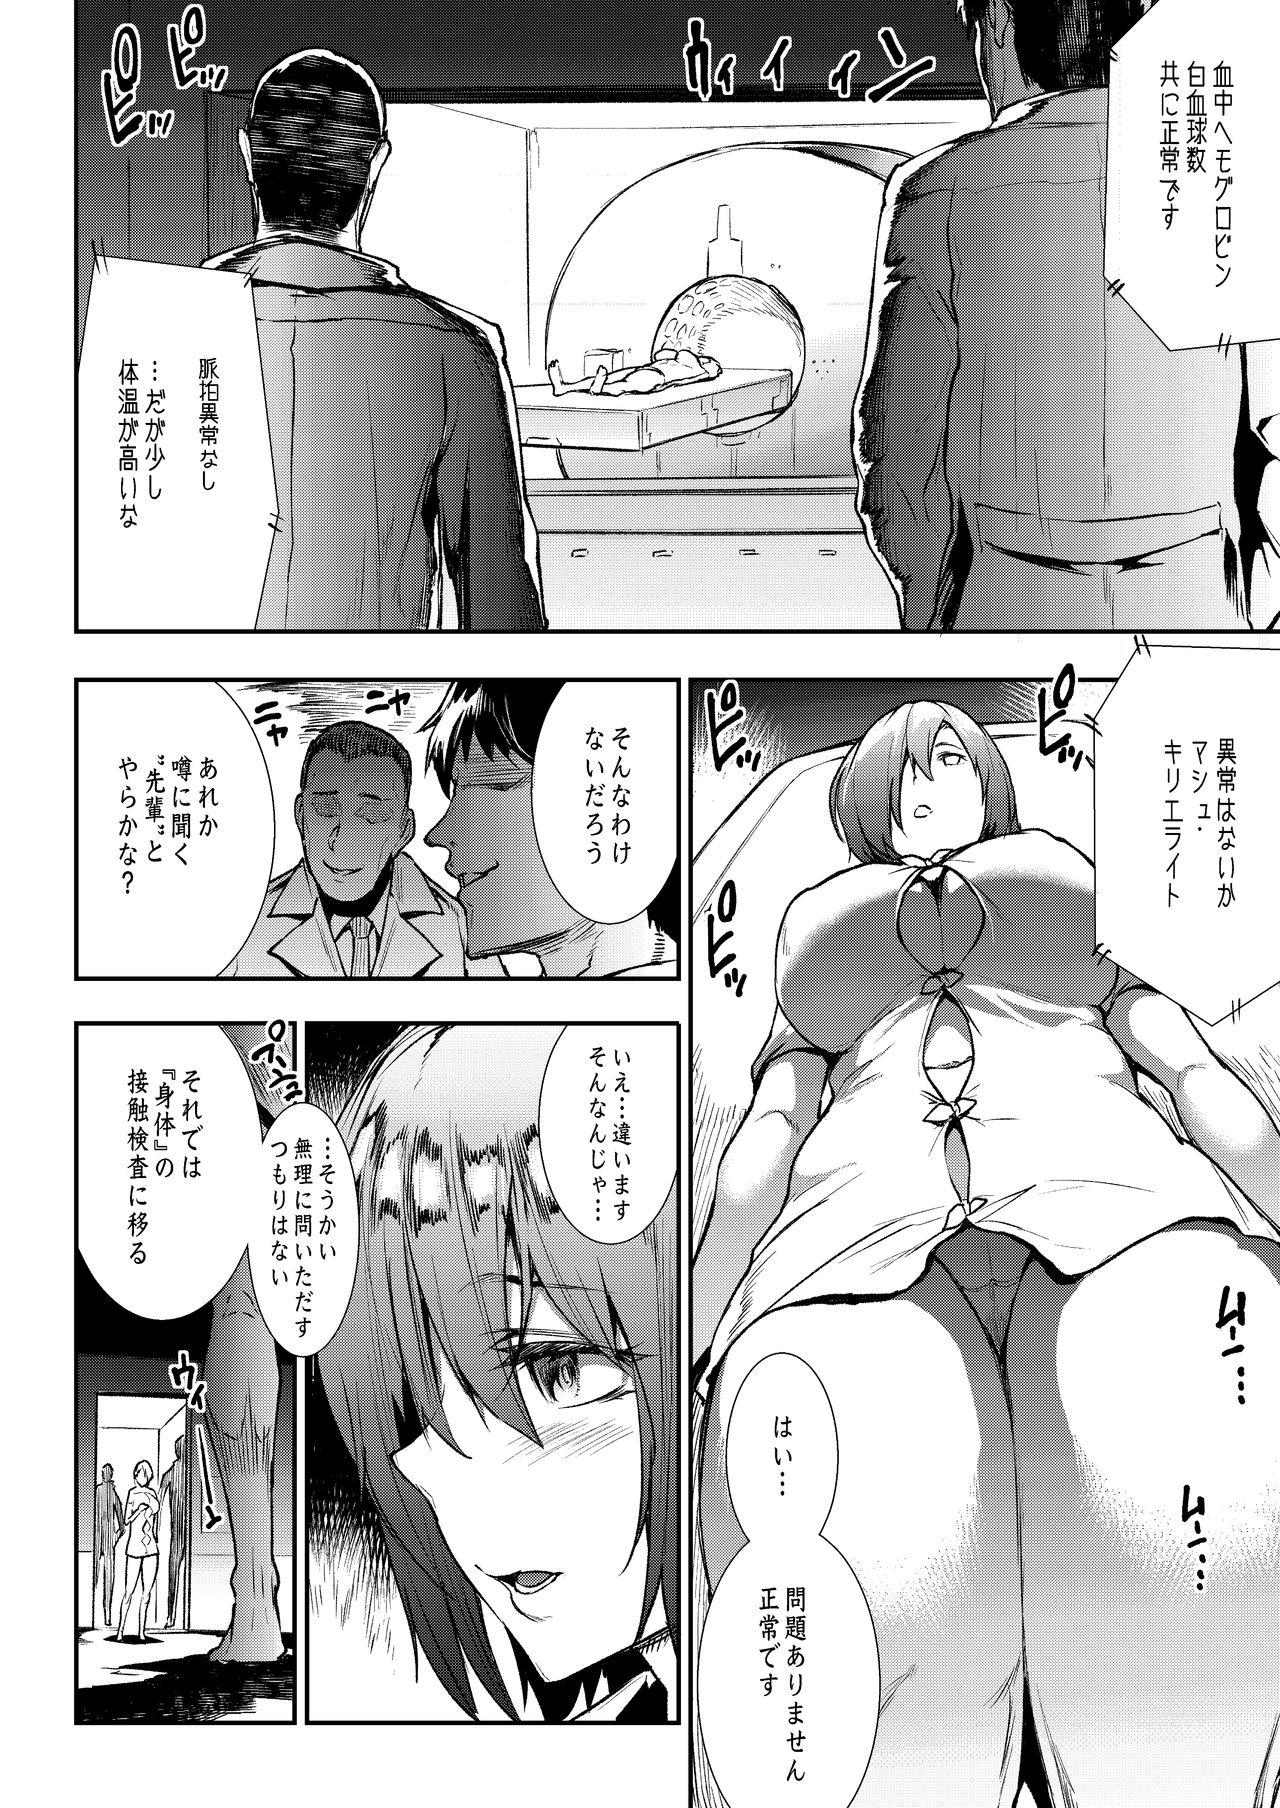 Family Taboo Mash, Rinkan. - Fate grand order Orgasms - Page 6